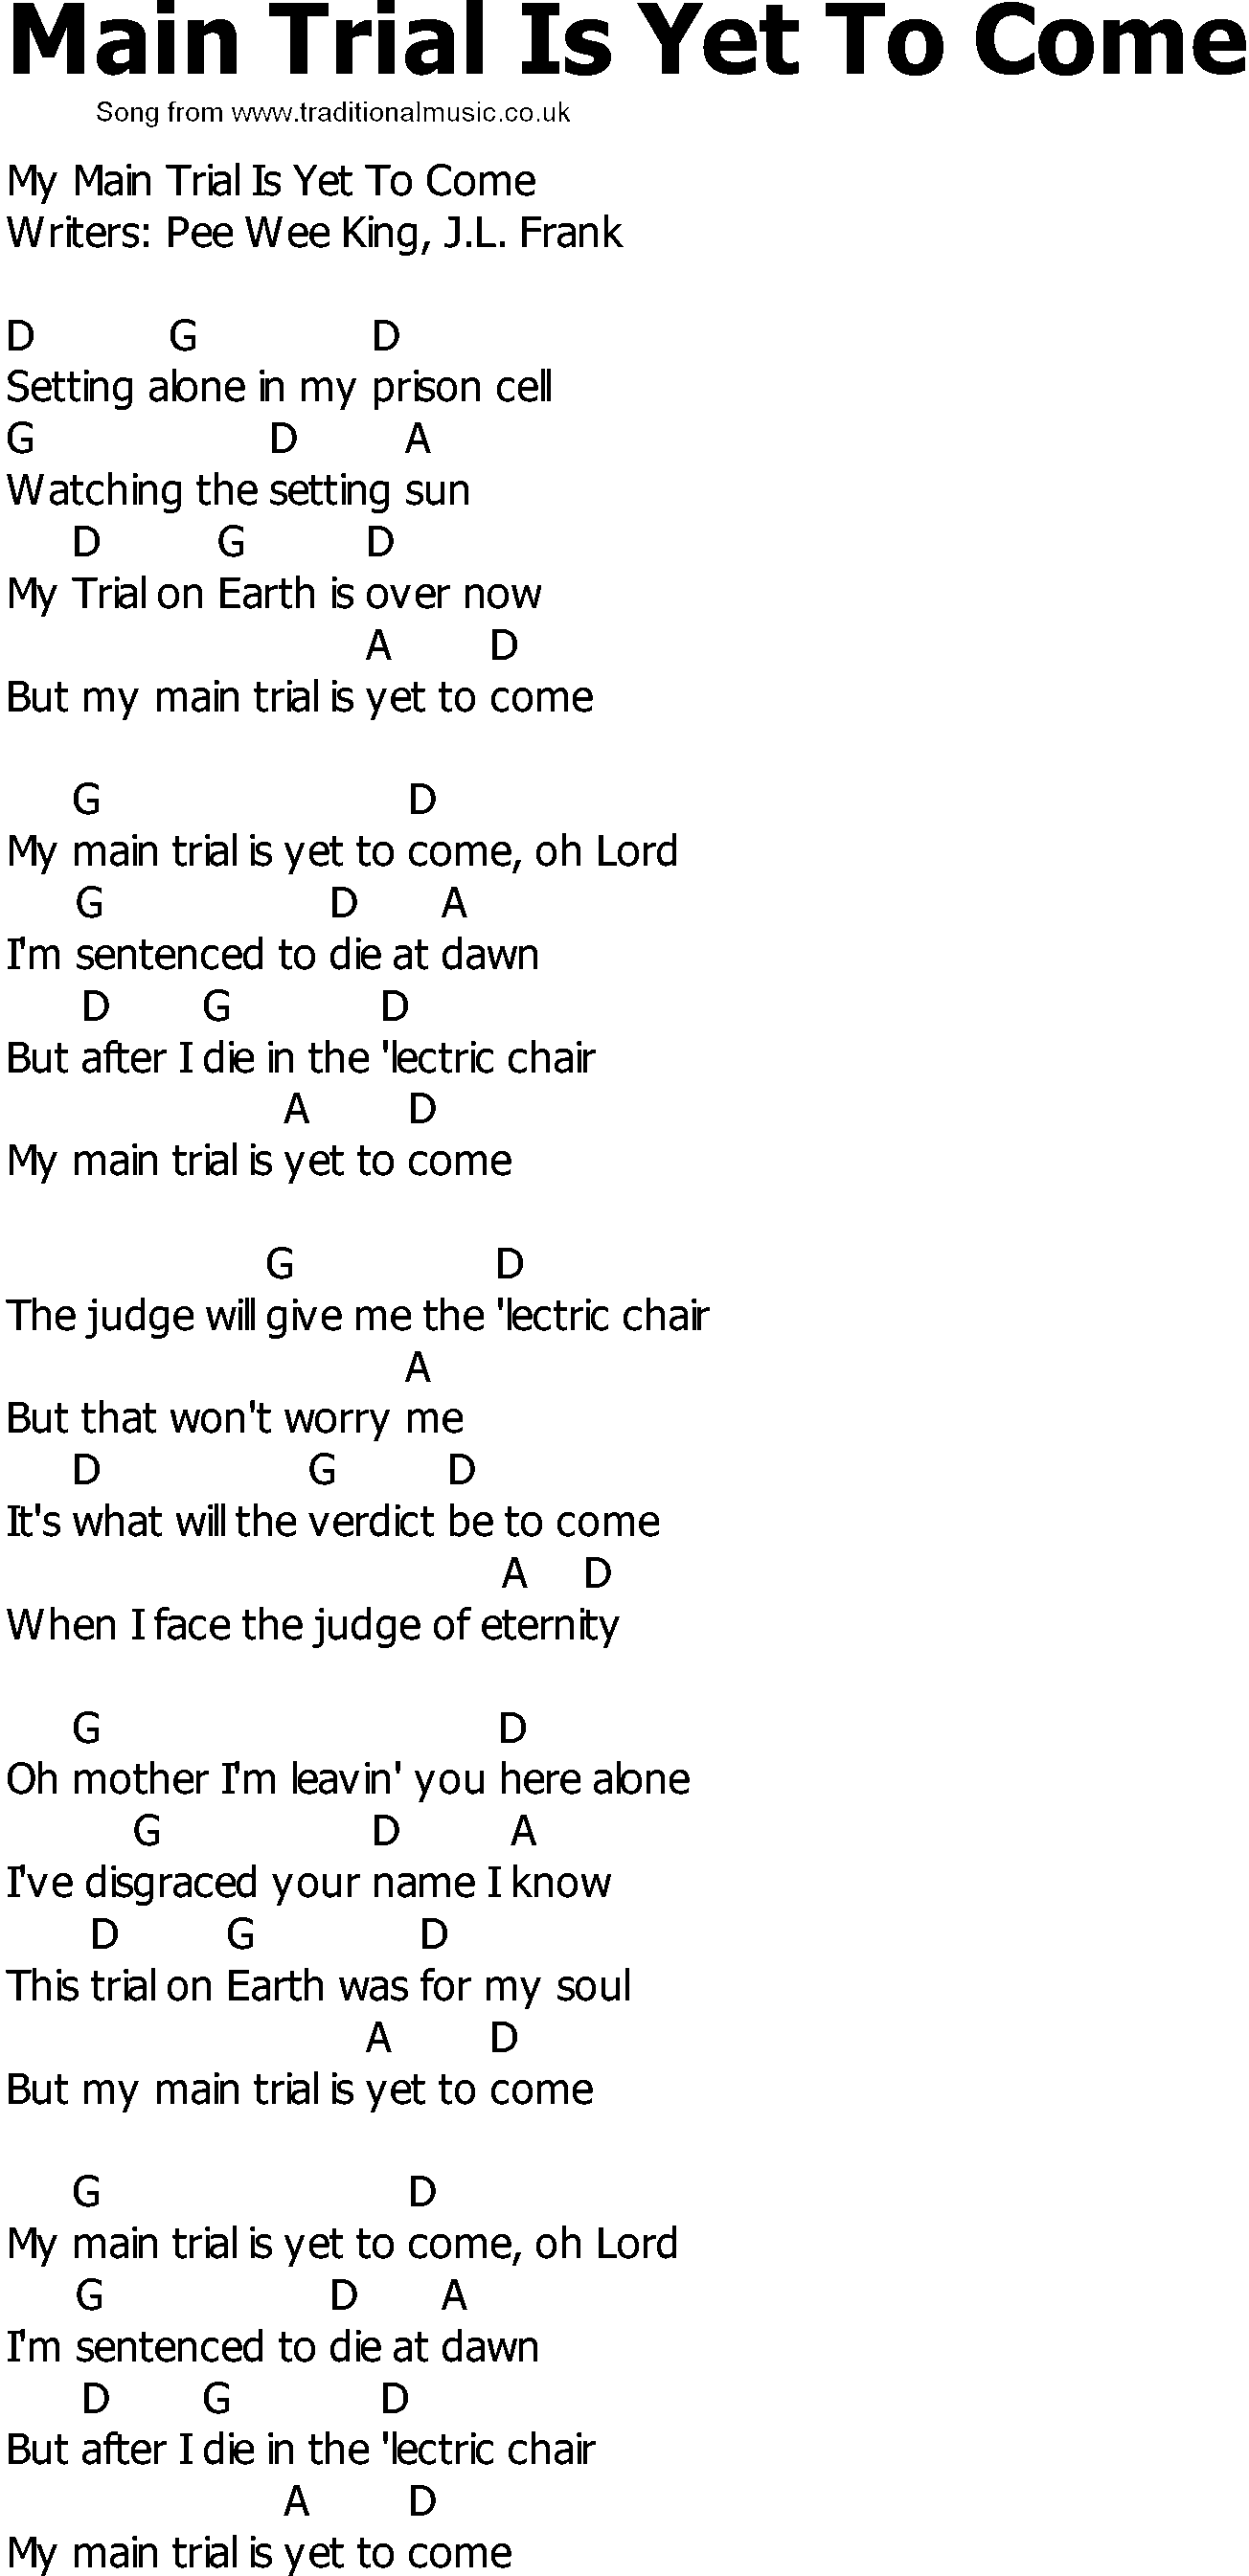 Old Country song lyrics with chords - Main Trial Is Yet To Come